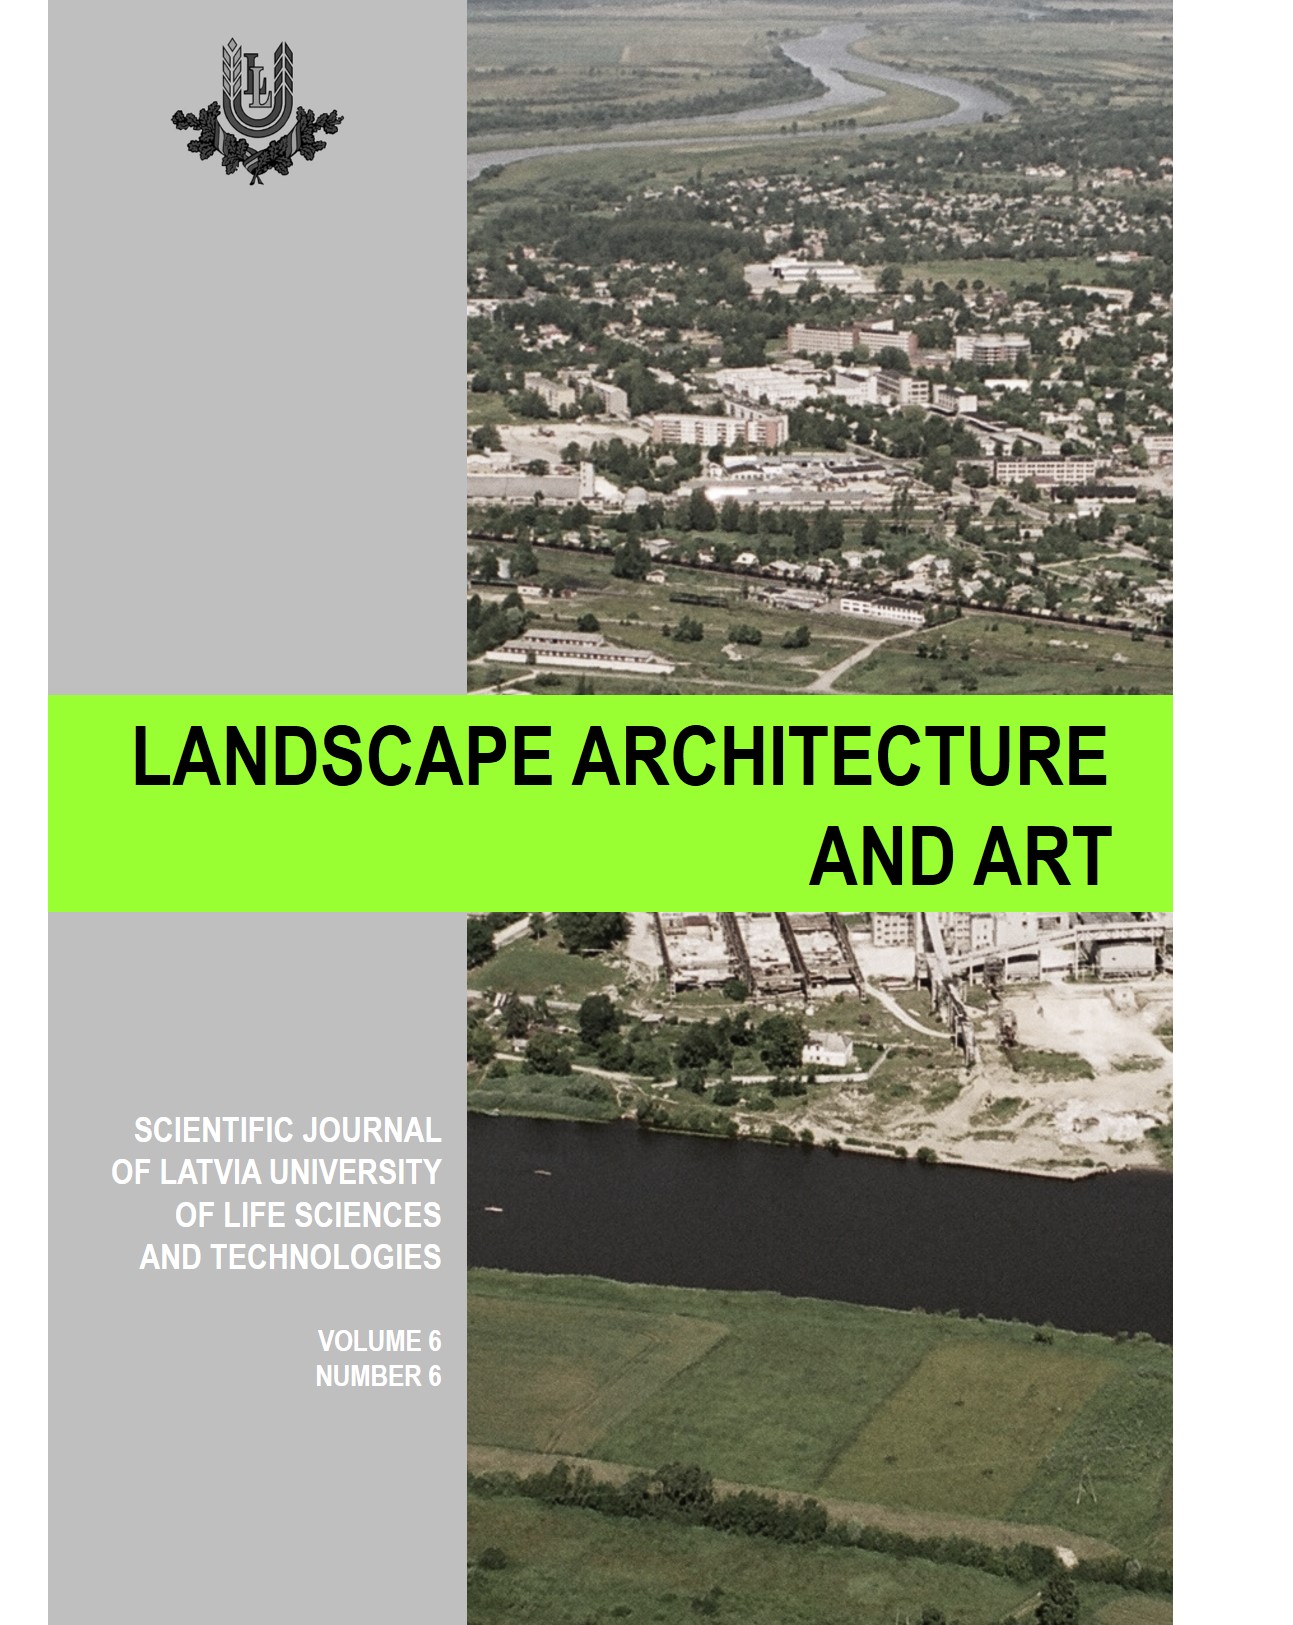 					View Vol. 6 No. 6 (2015): Landscape Architecture and Art, Volume 6, Number 6
				